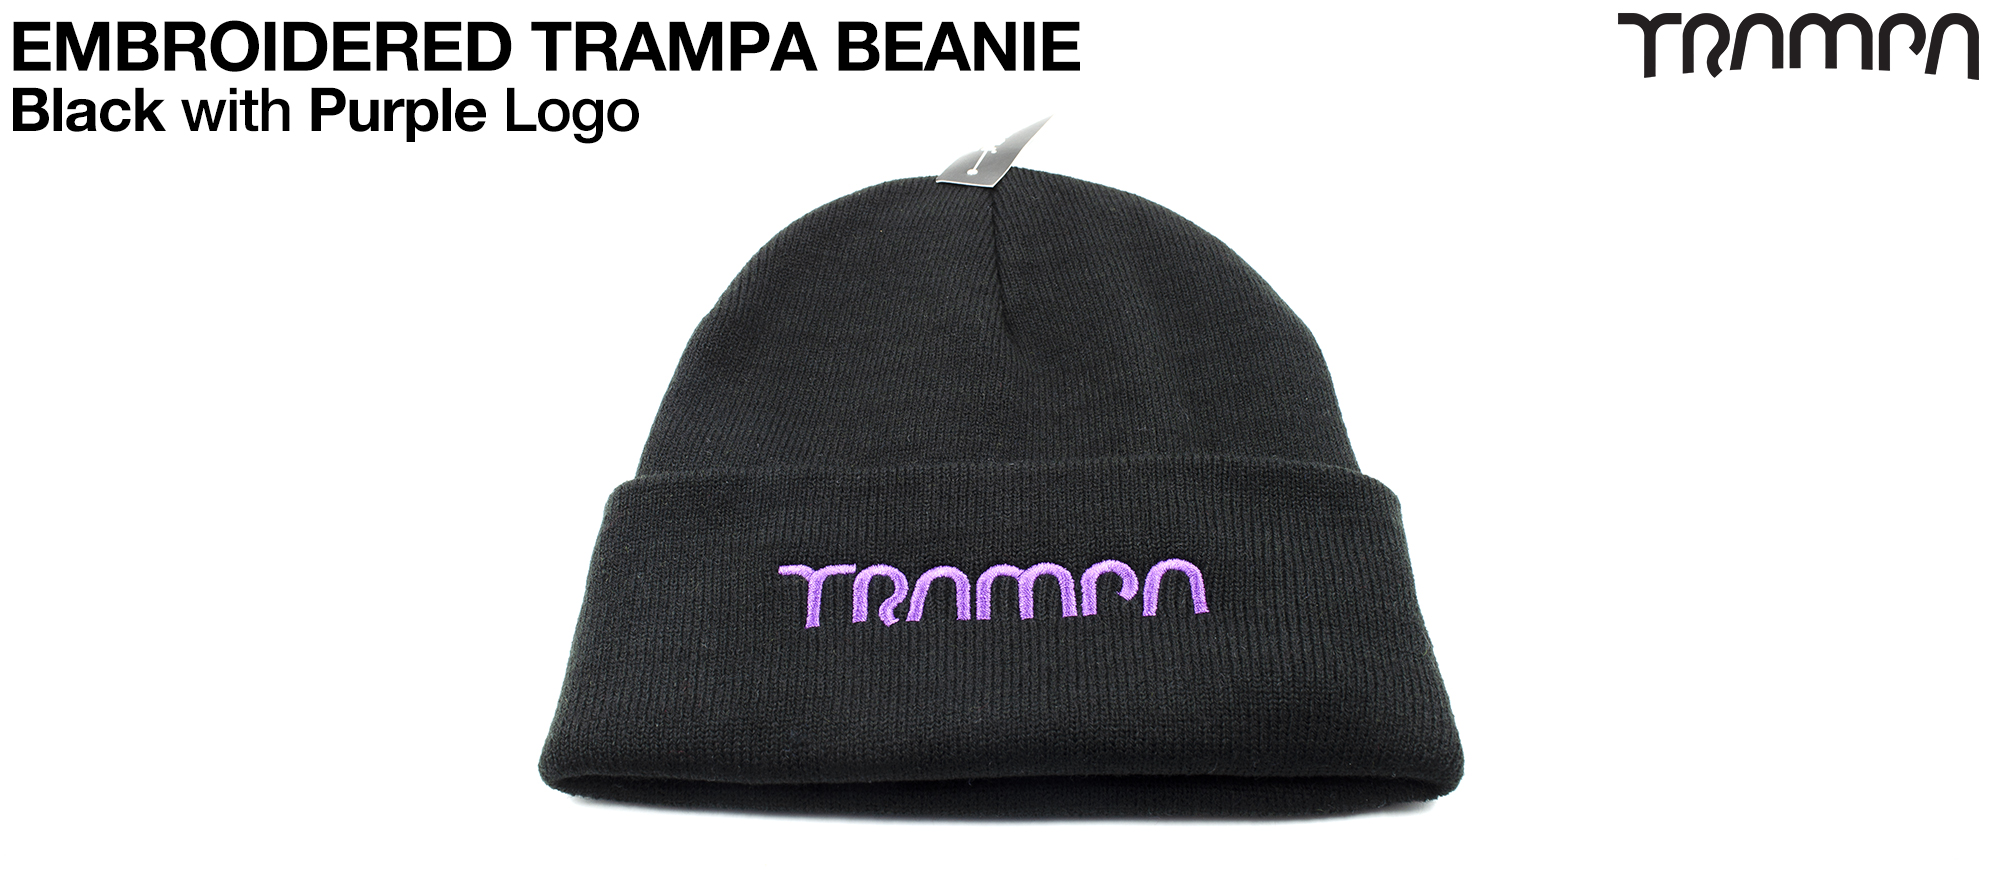 BLACK Woolie hat with PURPLE TRAMPA logo  - Double thick turn over for extra warmth 